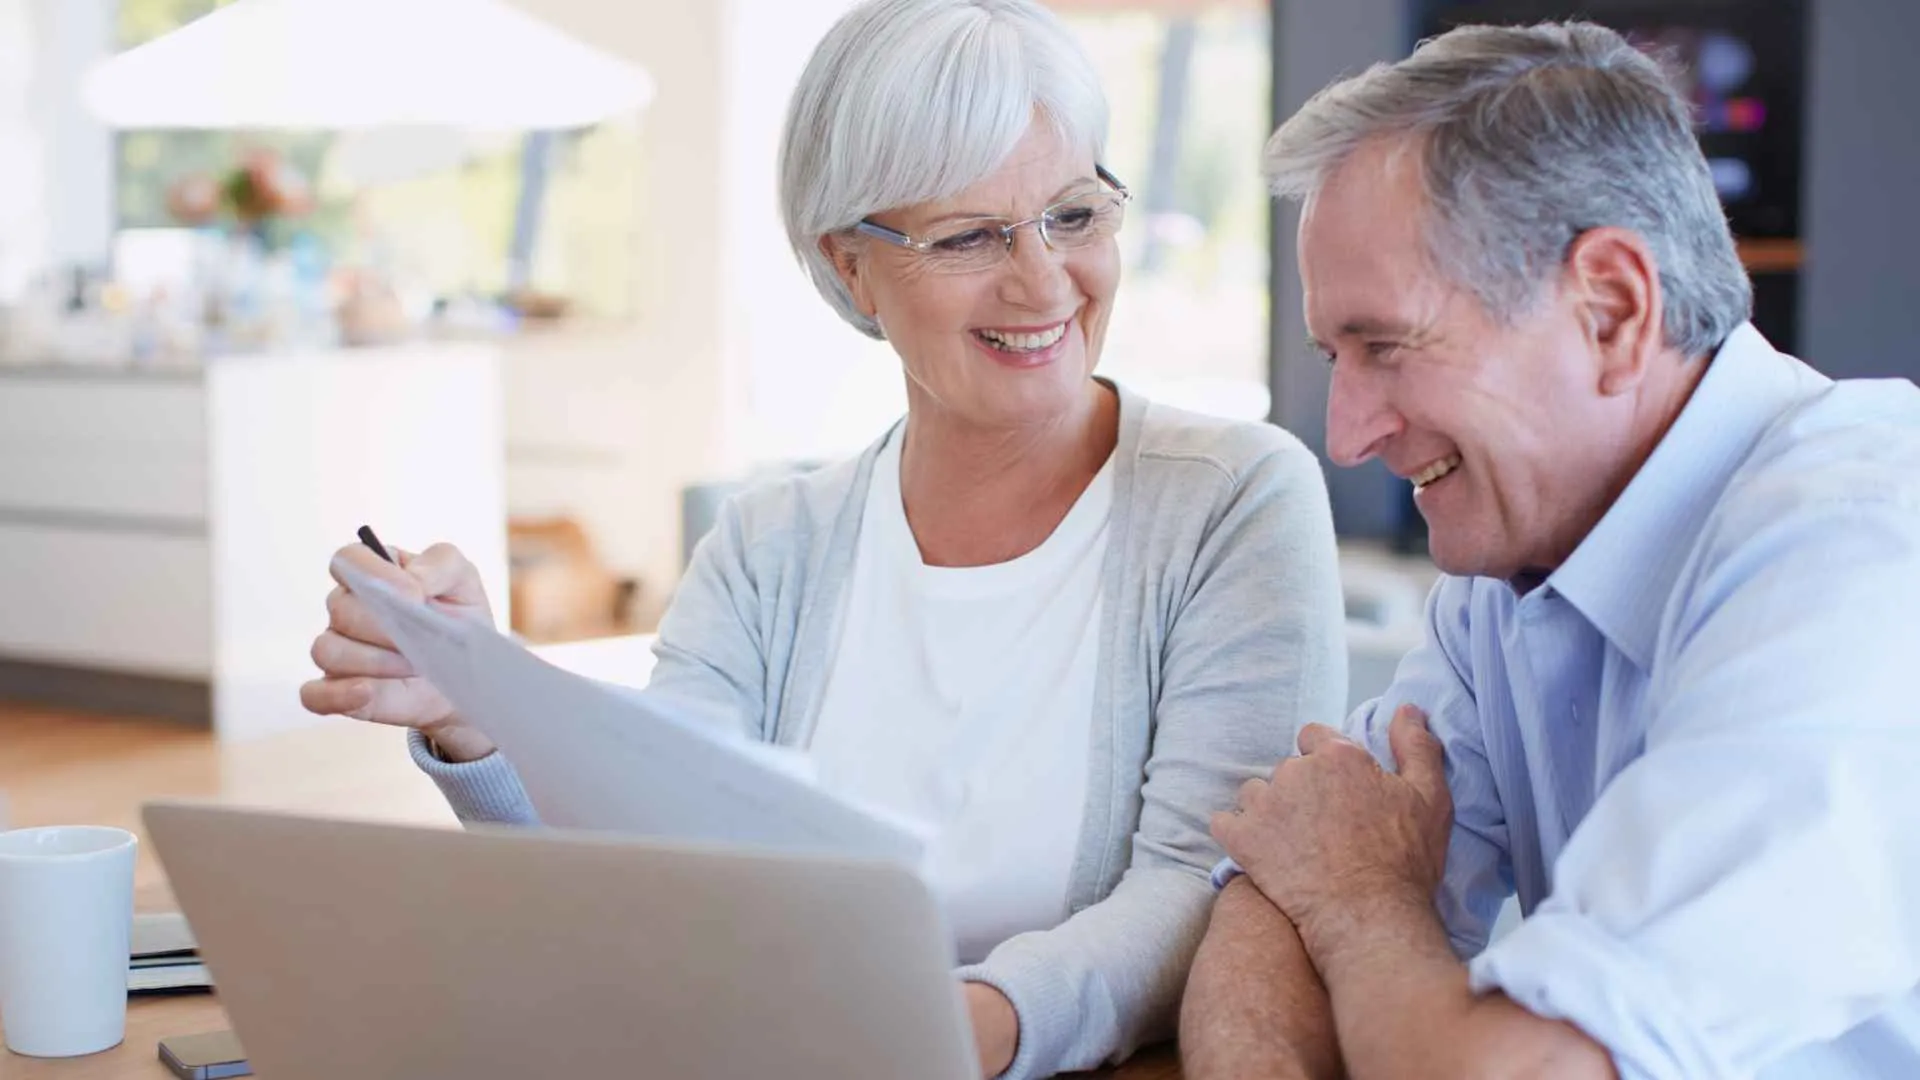 Shot of a senior couple working on their finances using a laptophttp://195.